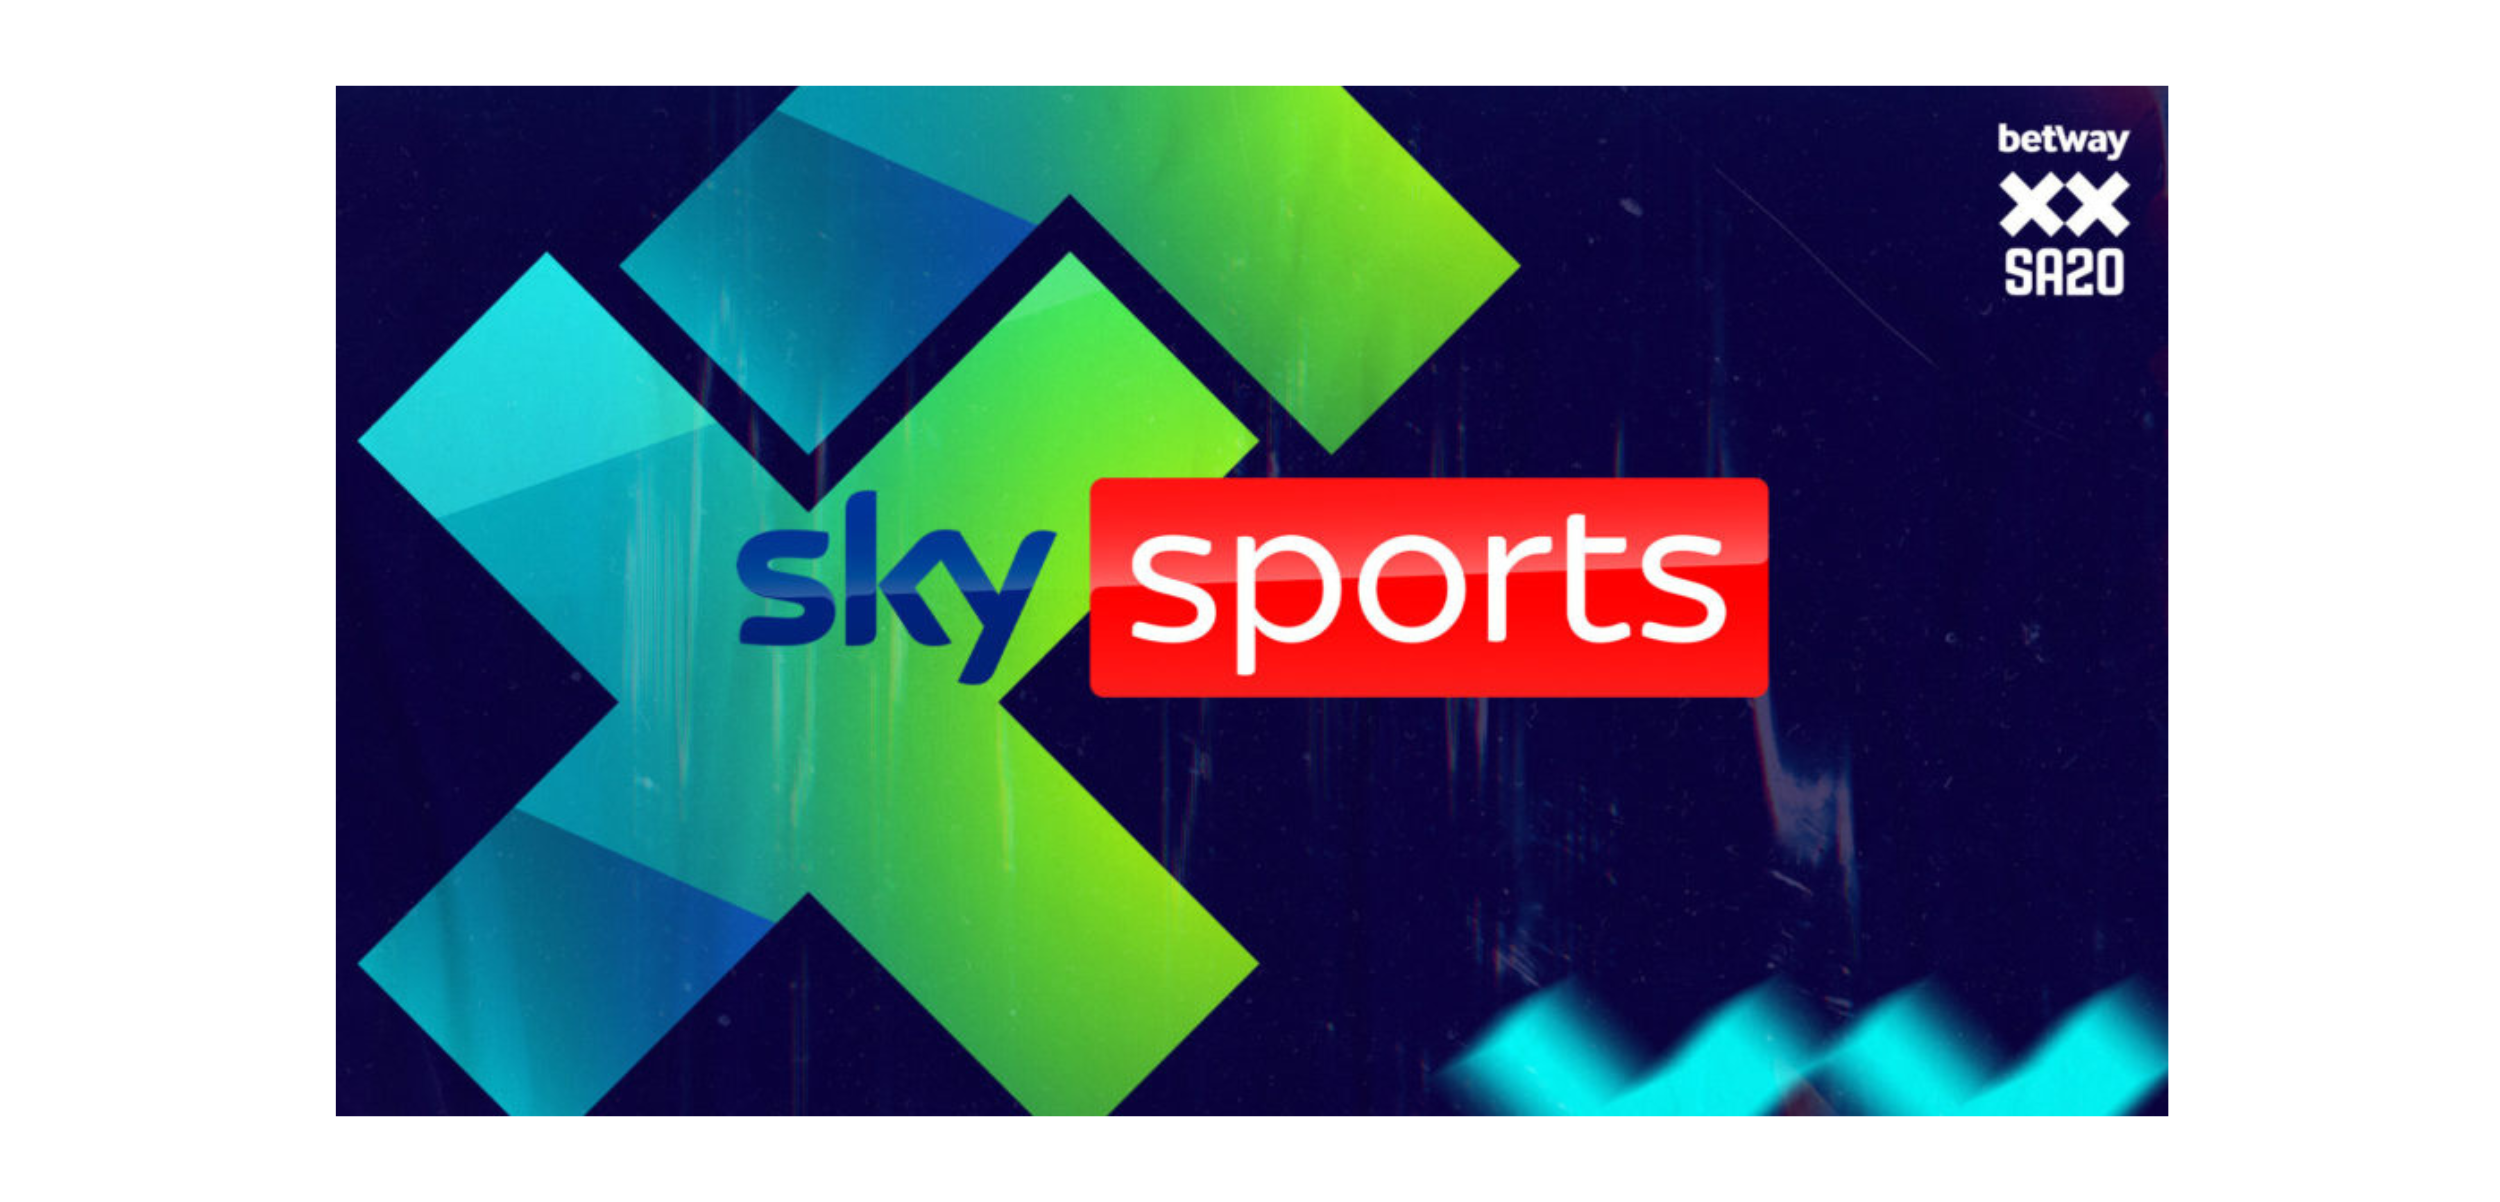 SA20 League: Betway SA20 and Sky Sports announce new rights deal